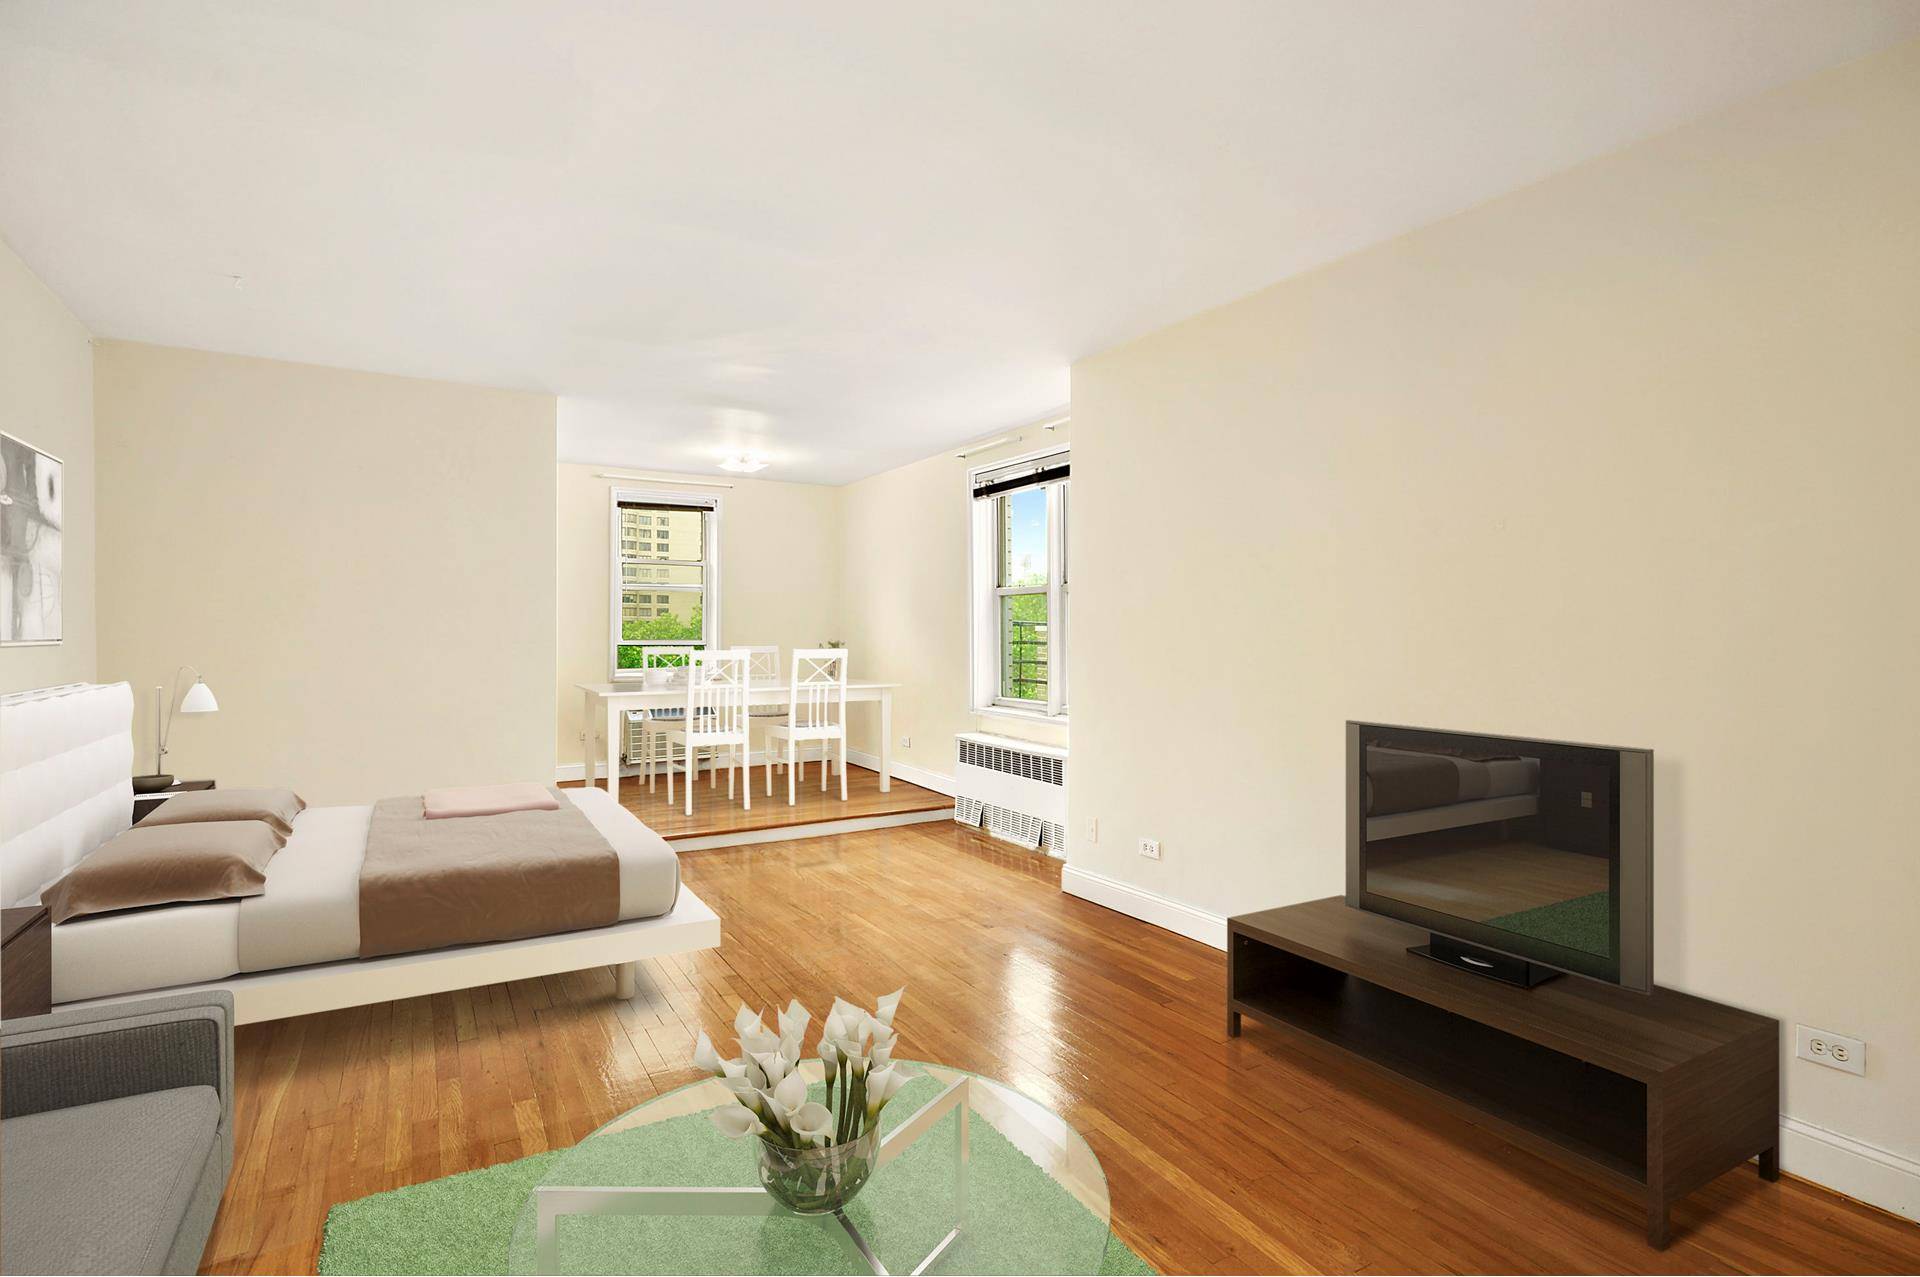 Welcome home to this beautiful penthouse apartment located at 320 East 35th Street.